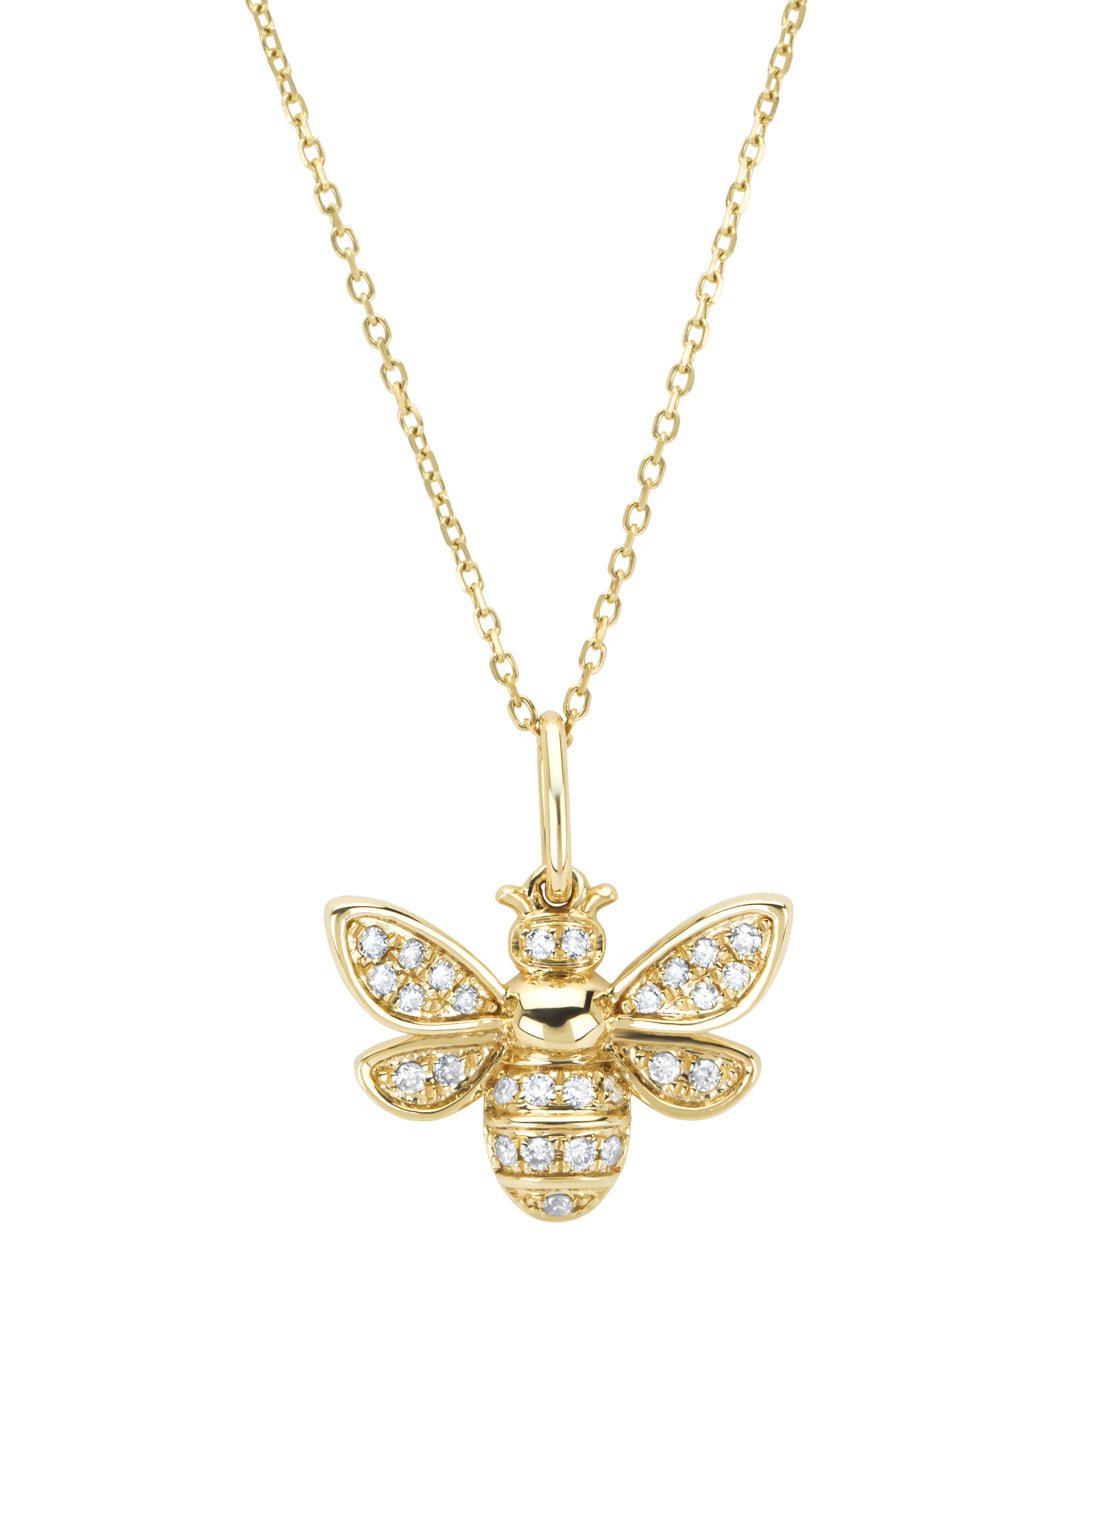 Yellow gold pendant with necklace, 0.12 ct diamond, queen bee